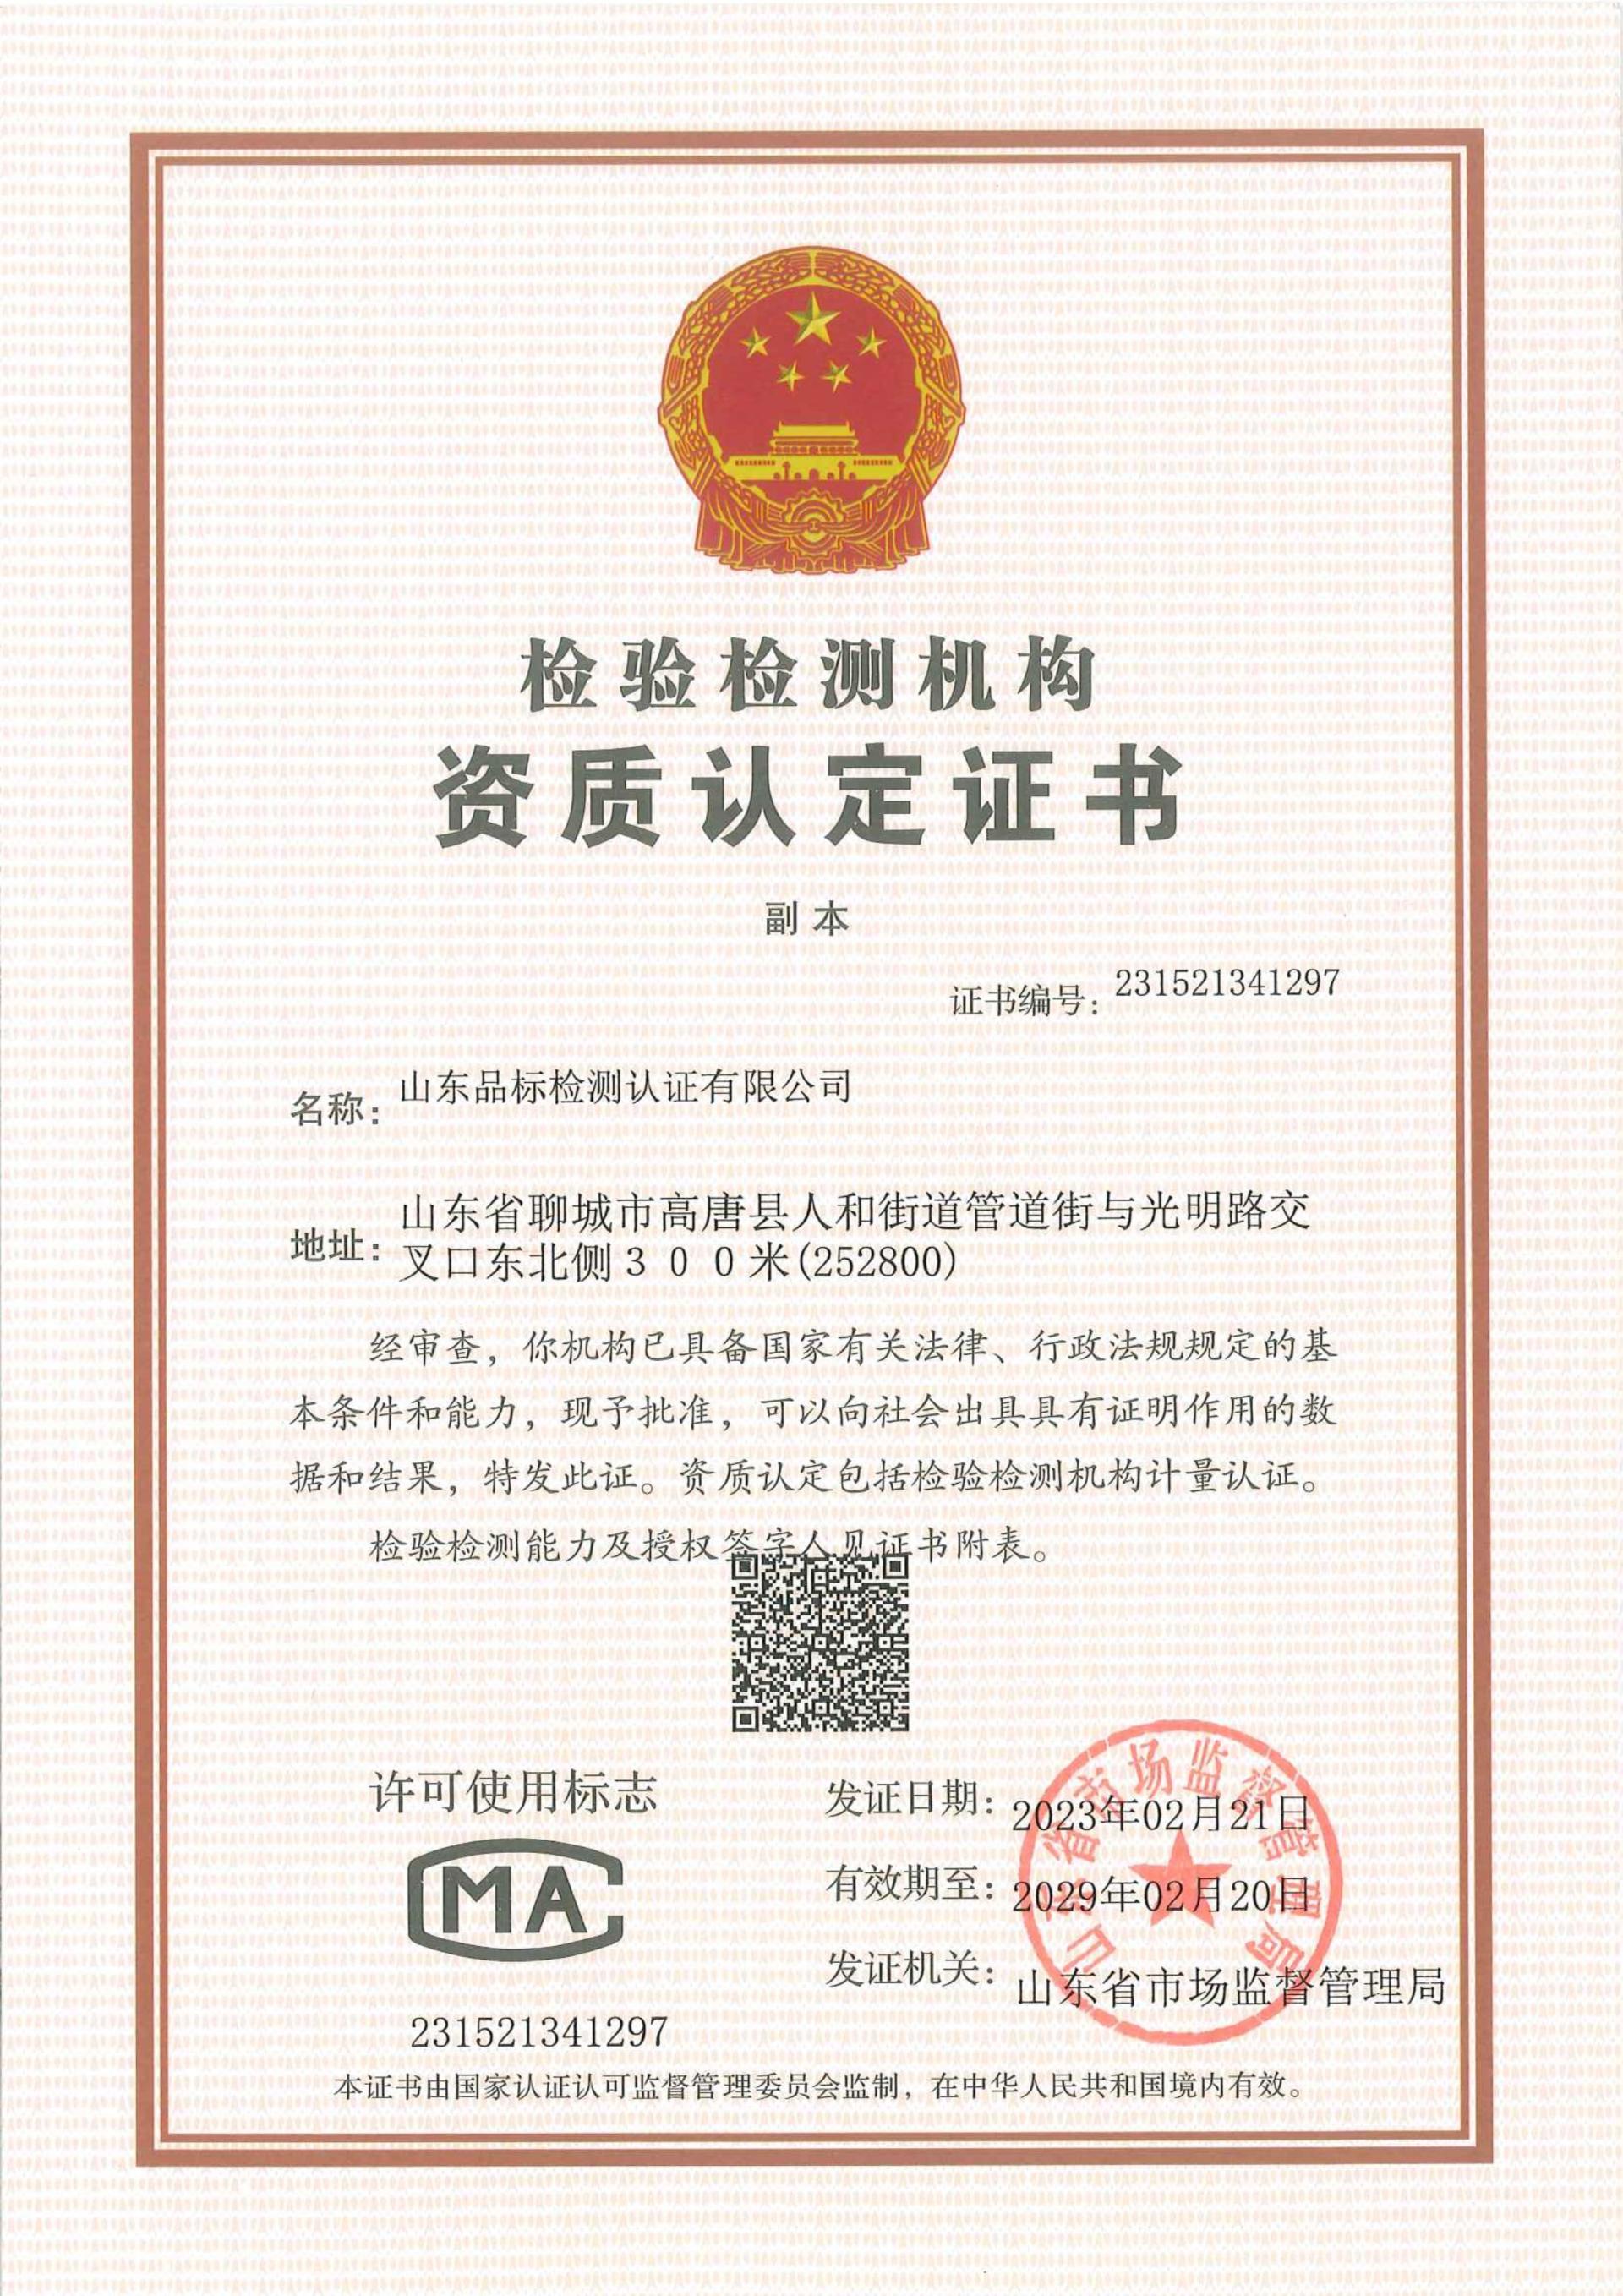 Shandong Product Standard Testing and Certification Co., Ltd. won the Certificate of Qualification Accreditation of Inspection and Testing Institutions (CMA)